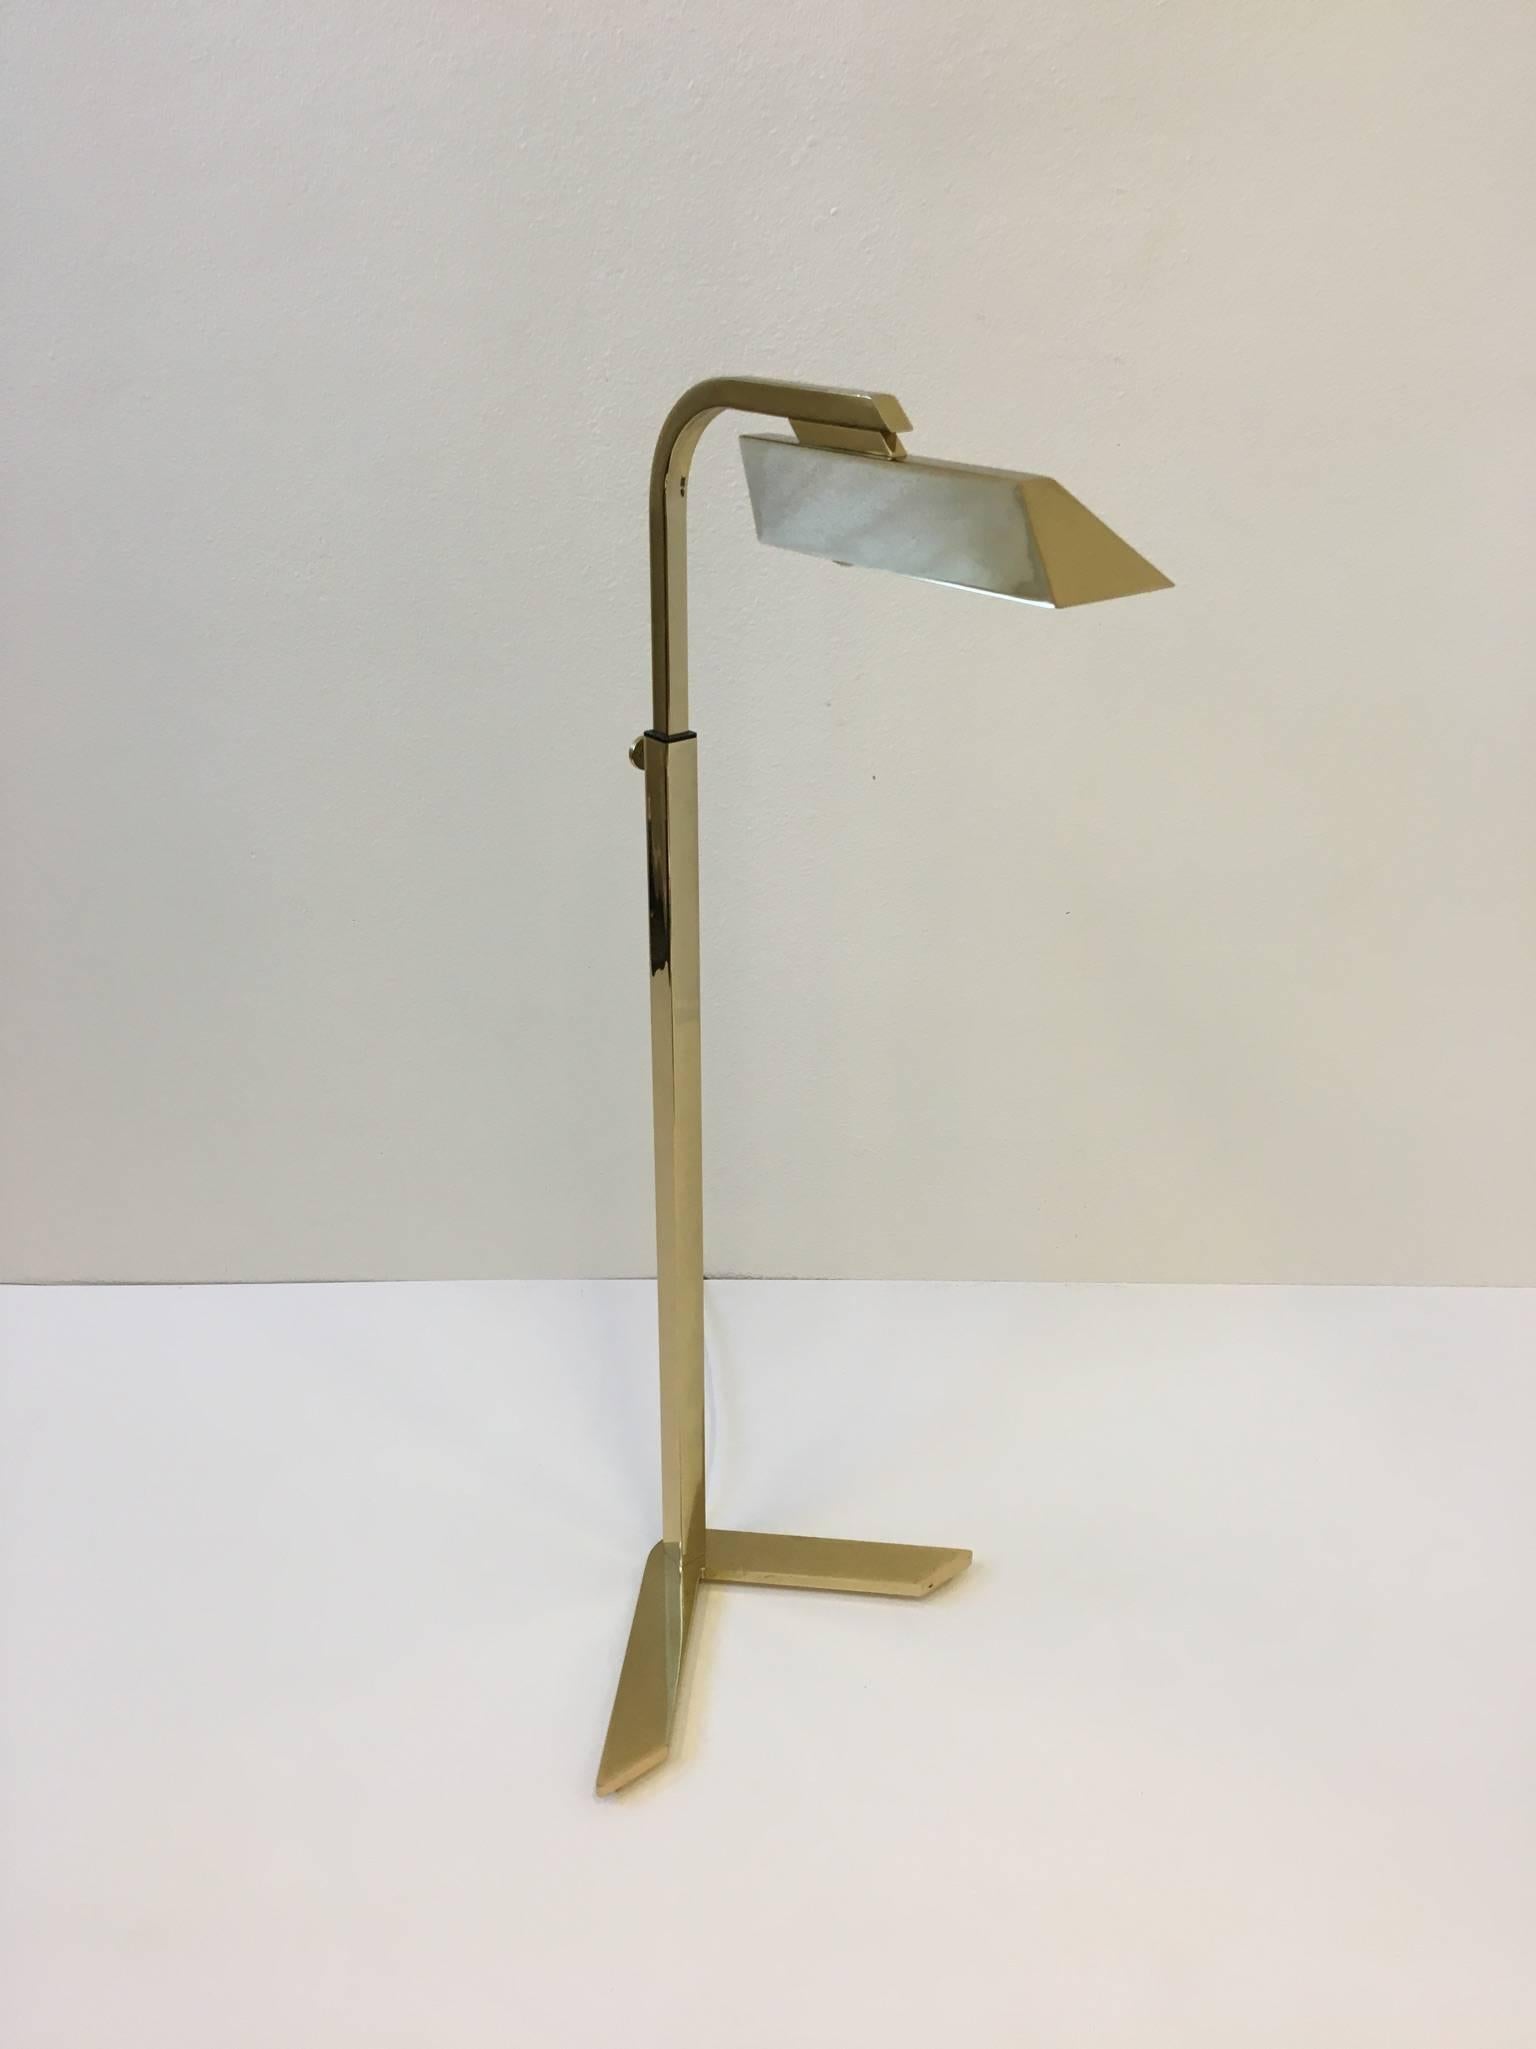 A beautiful polished brass V floor lamp designed by renowned designer Charles Hollis Jones in 1973.
The lamp can be adjusted up and down and has a full range dimmer.
Newly rewired.
Overall Dimensions: 40